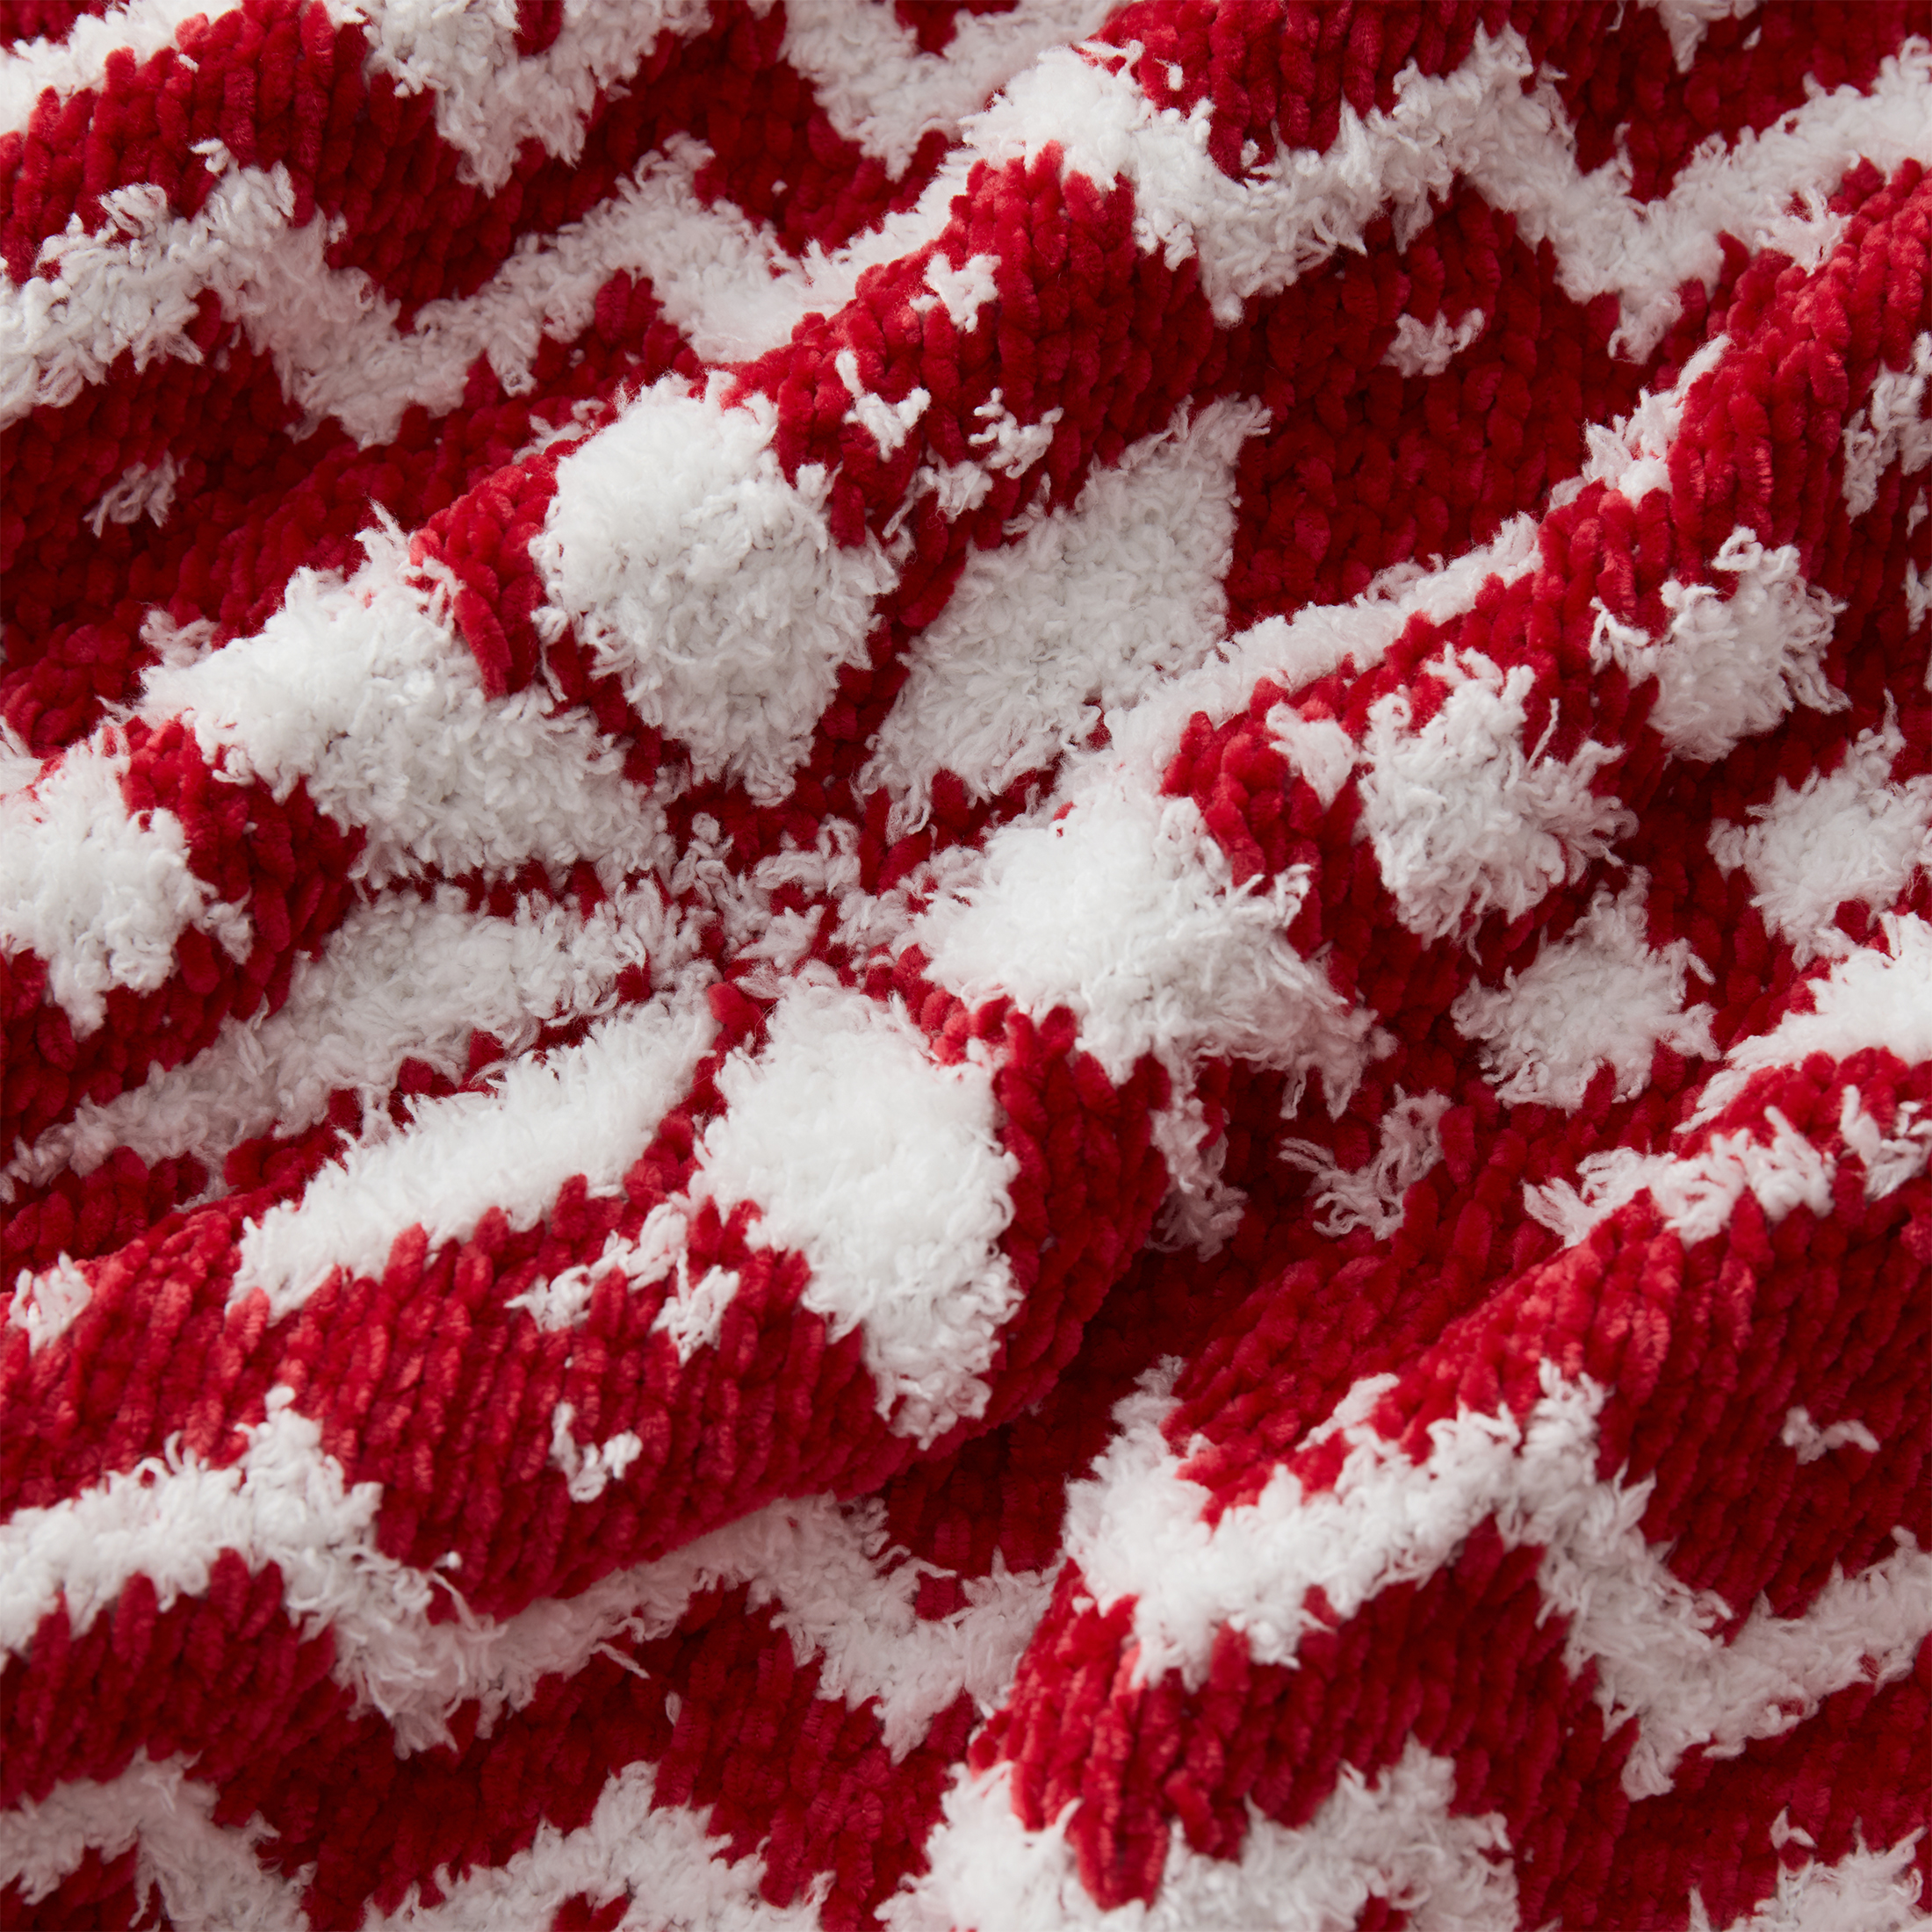 My Texas House Aspen Chenille Throw Blanket, Red, Standard Throw - image 4 of 6